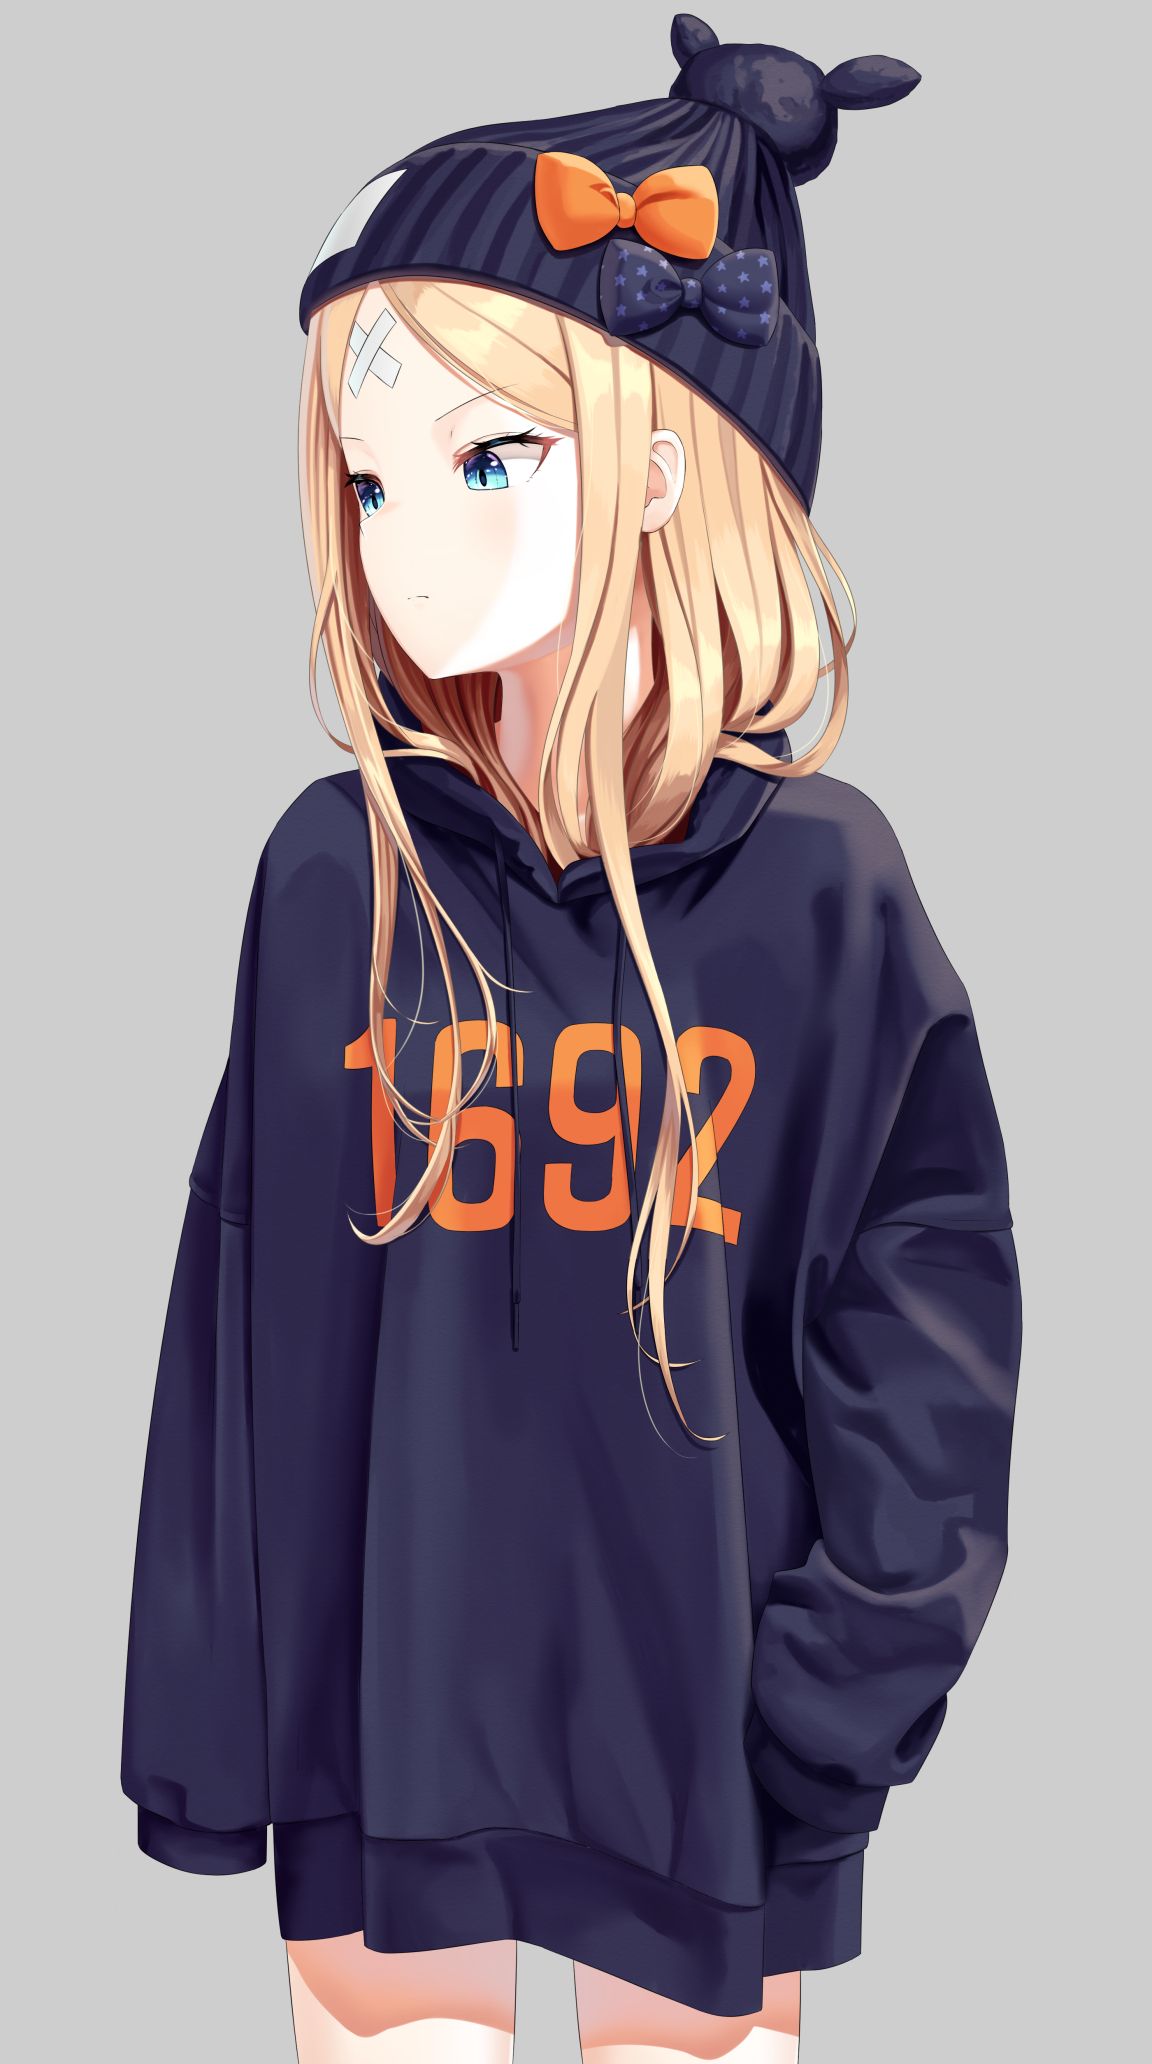 Anime 1152x2064 anime anime girls Fate/Grand Order Abigail Williams (Fate/Grand Order) portrait display simple background blonde blue eyes Fate series